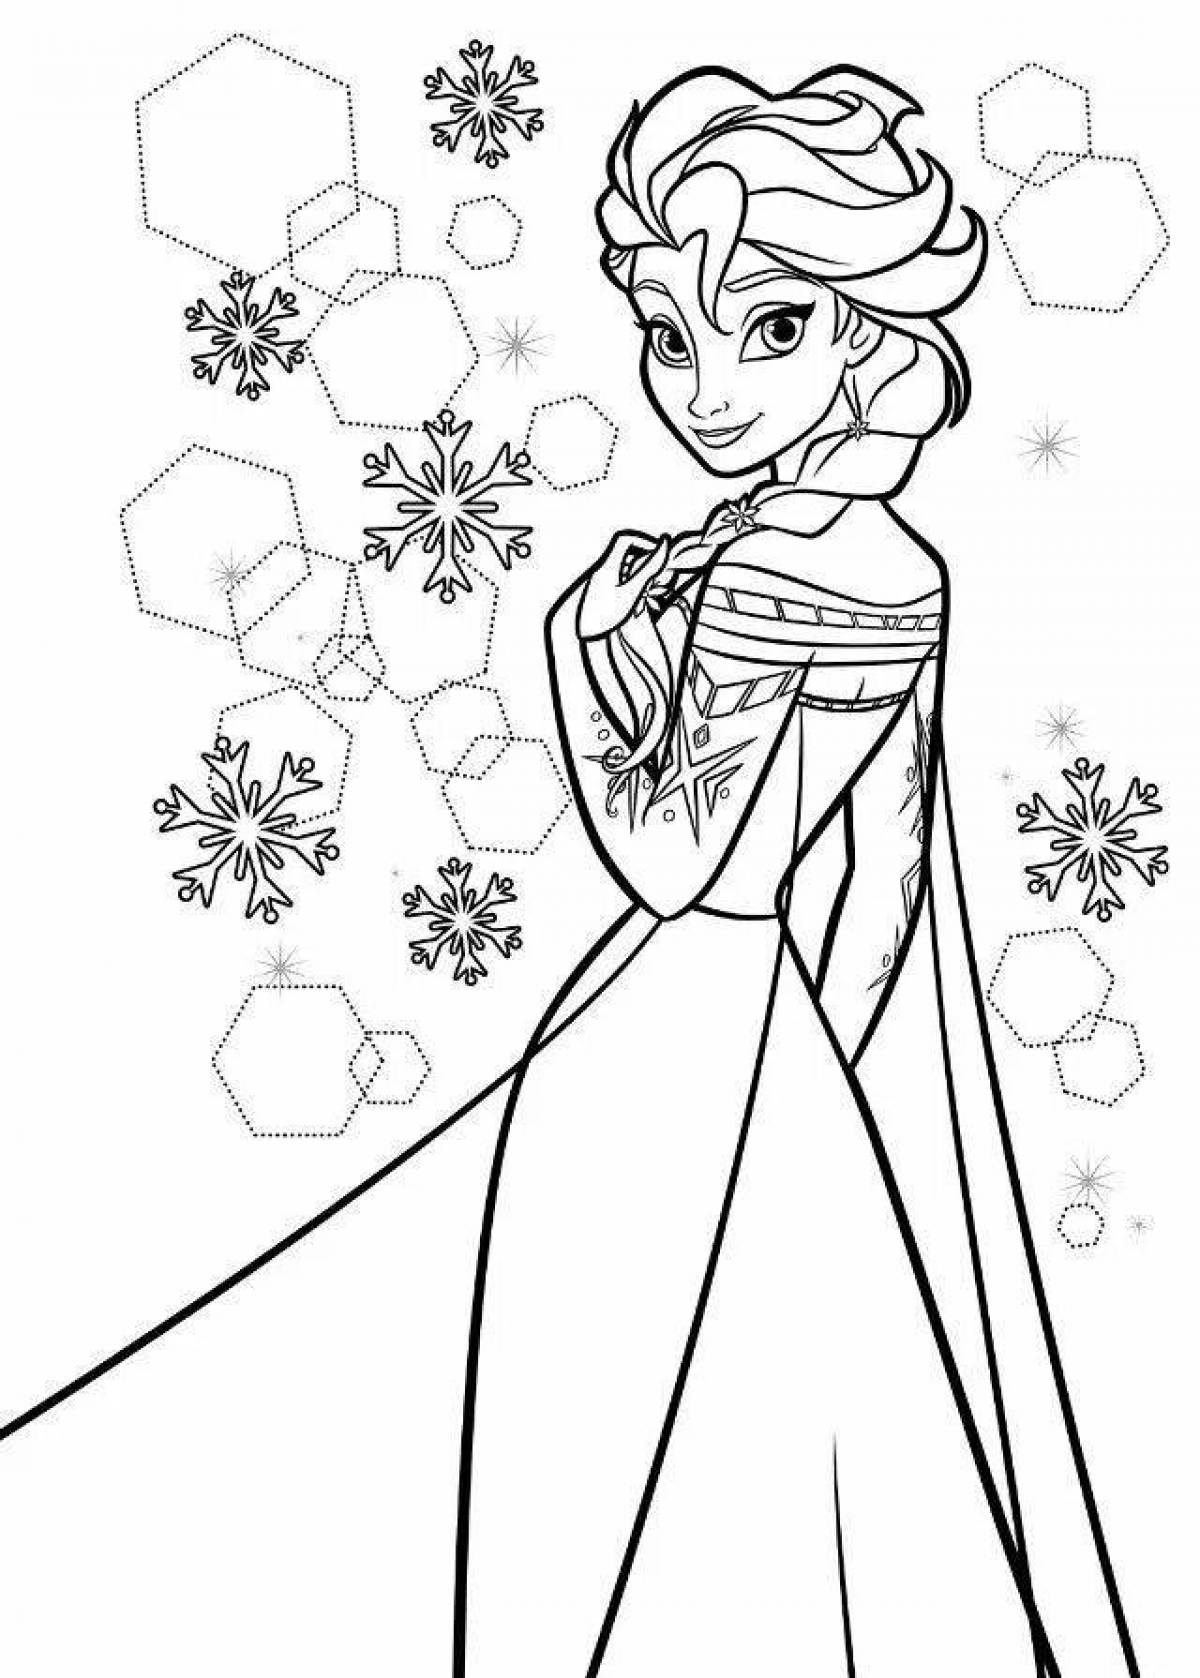 Wonderful coloring Elsa for children 3-4 years old